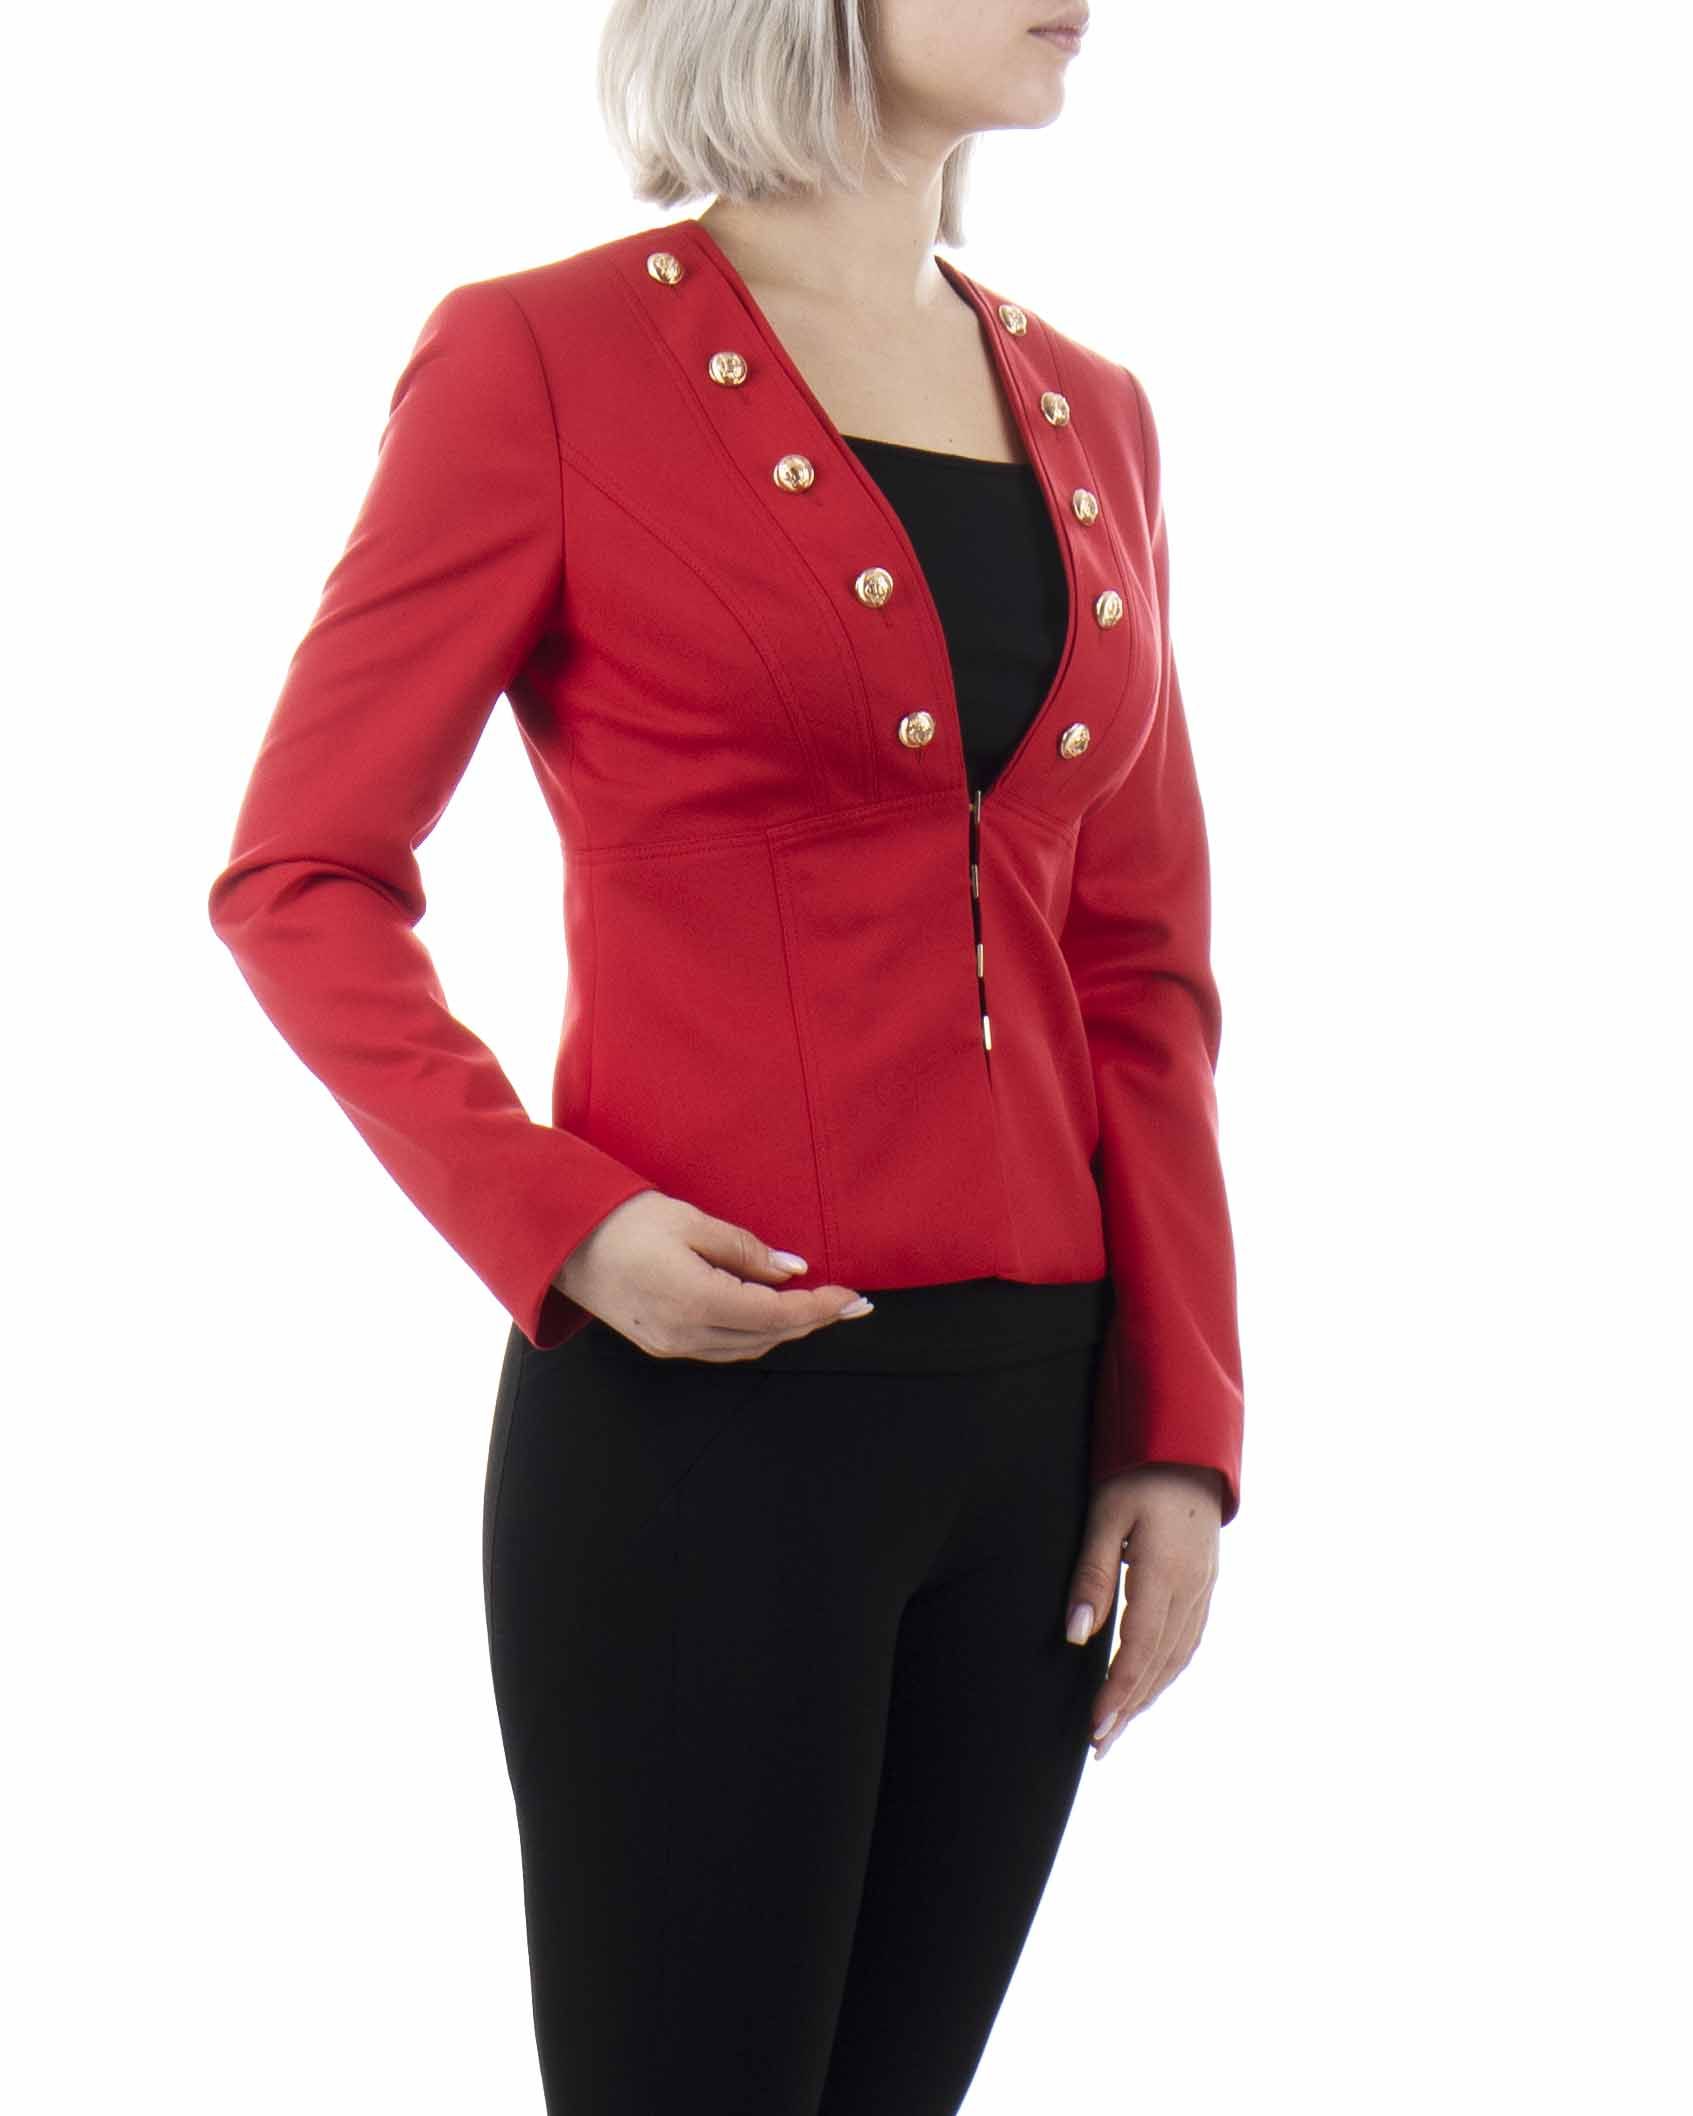 Fitted jacket without lapels, with decorative buttons 3